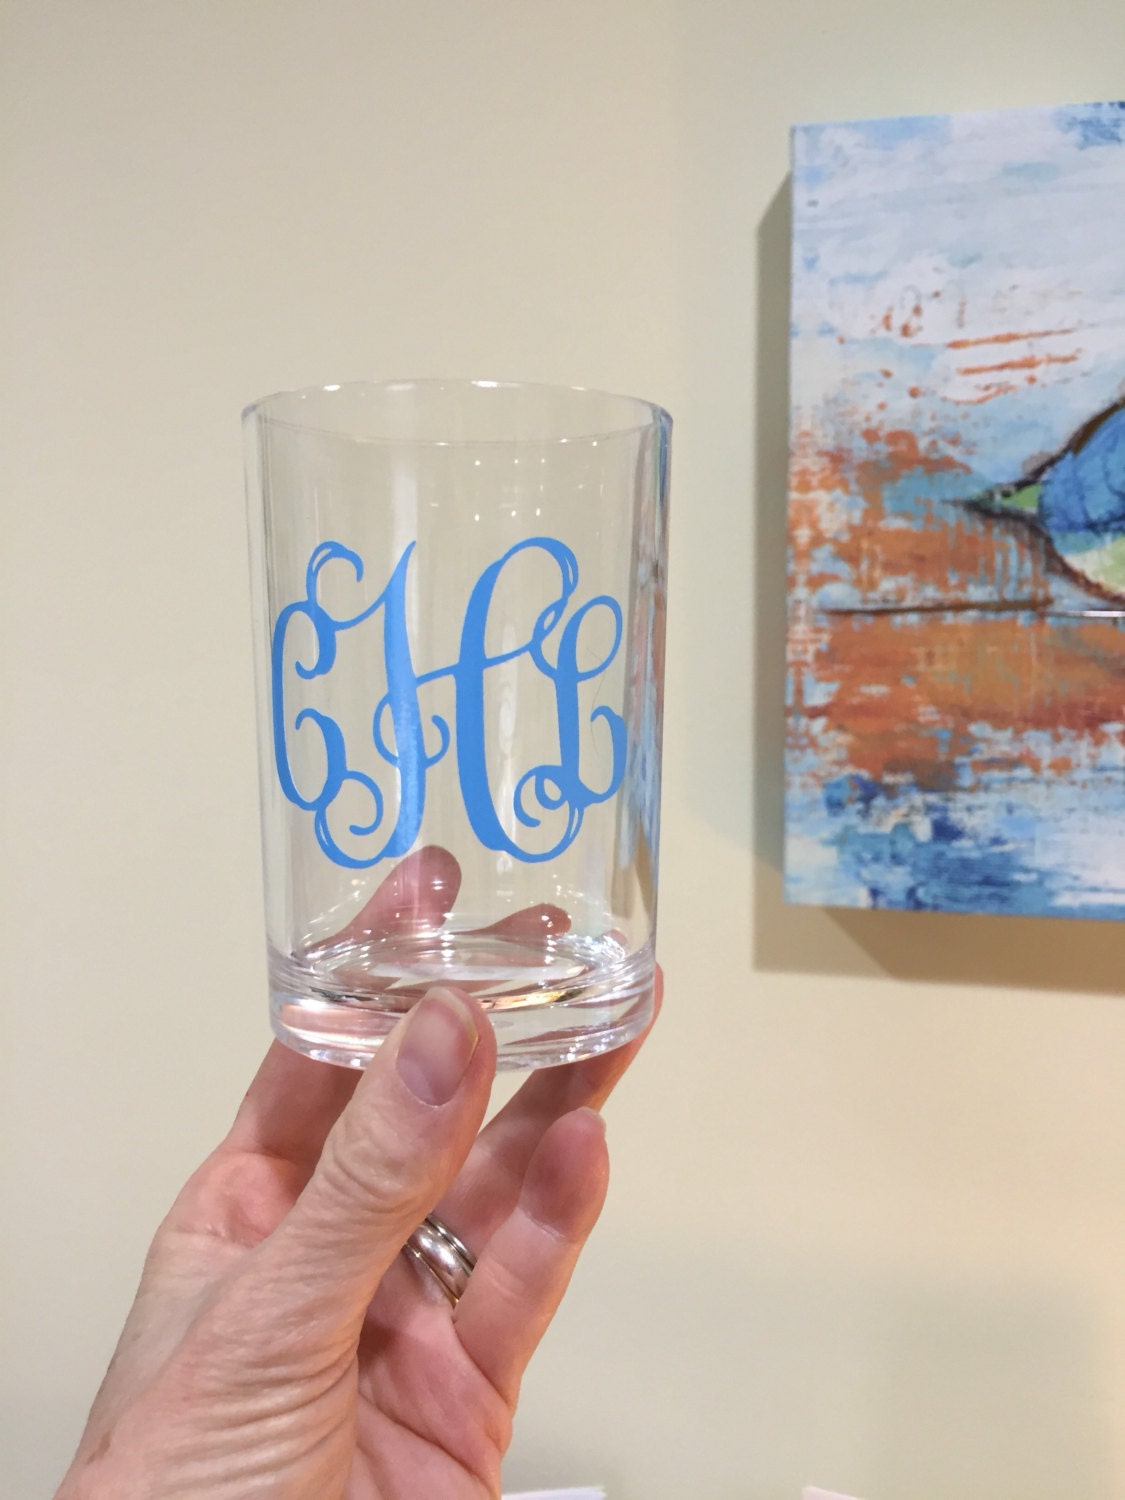 Monogrammed Large Acrylic Tumbler – Southern Touch Monograms